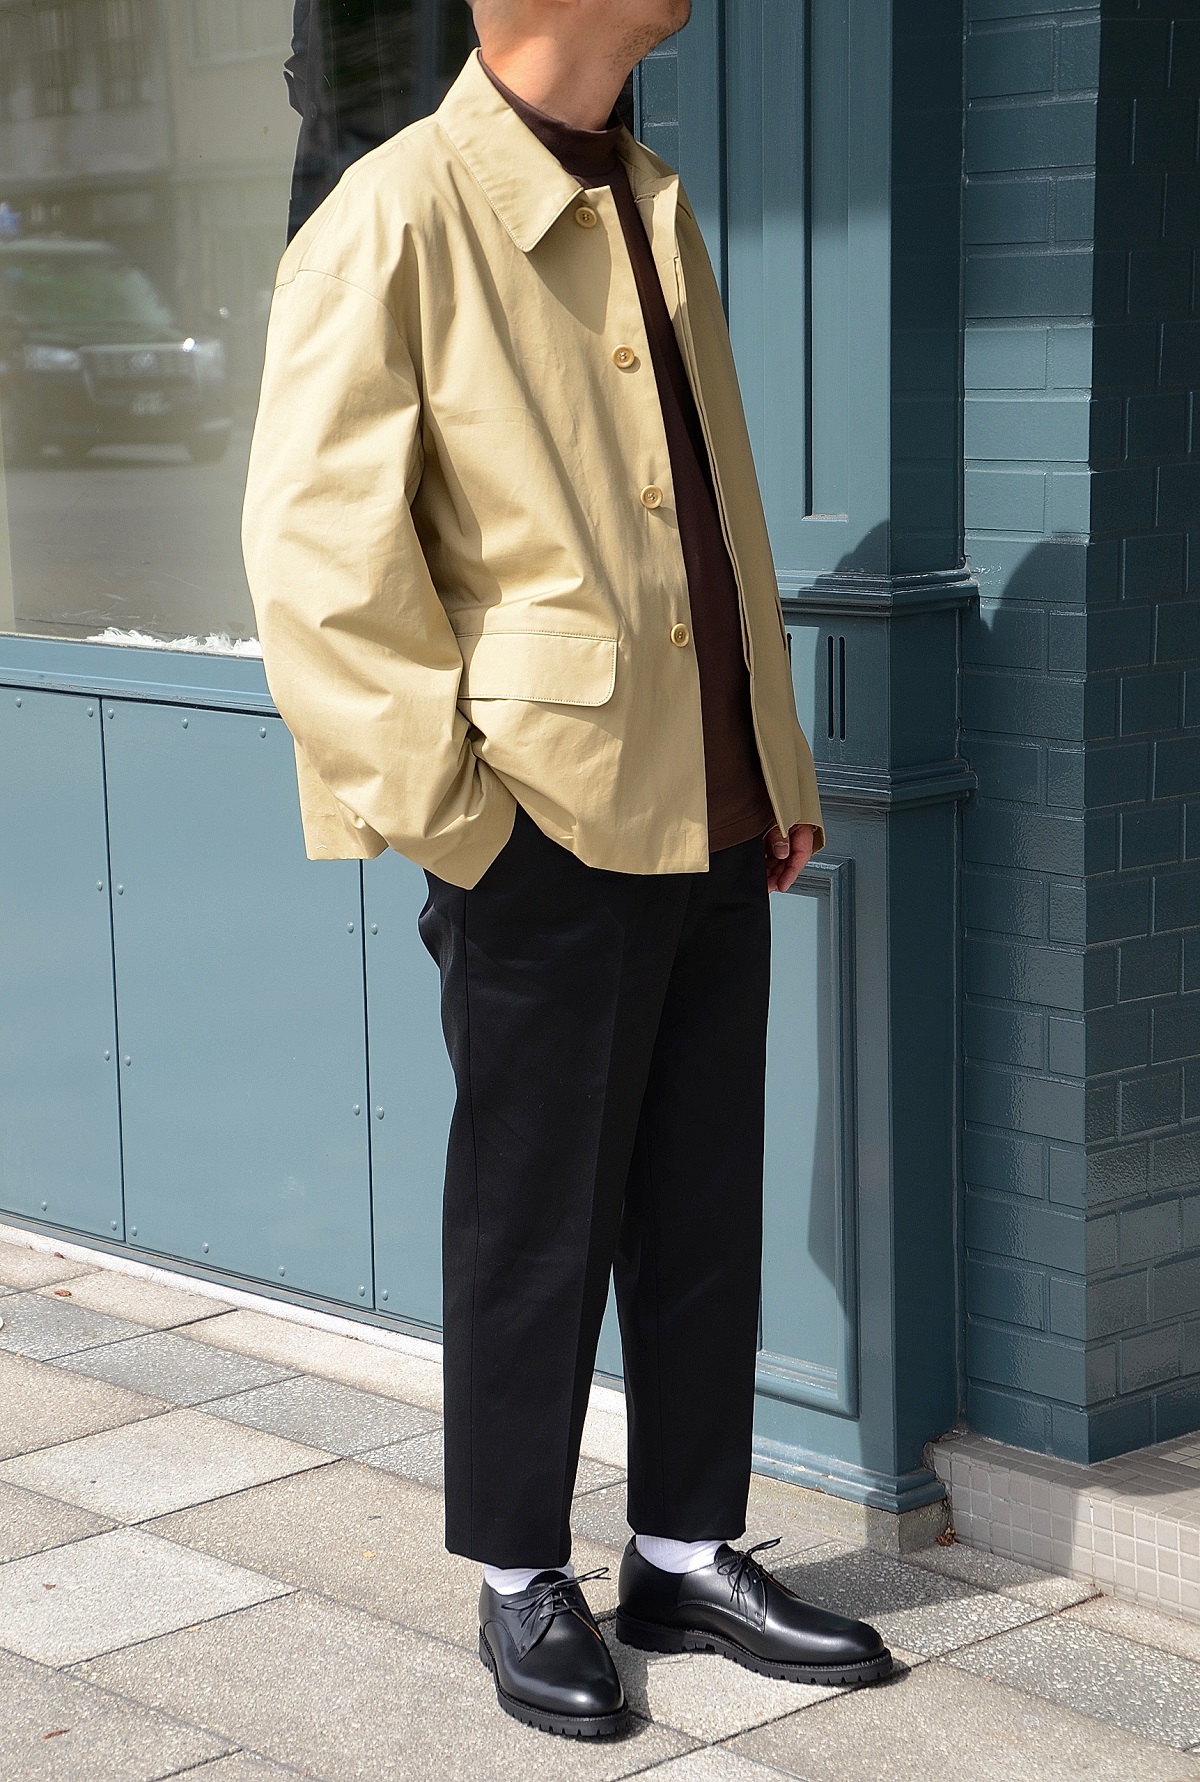 WEWILL ウィーウィル “CROPPED BALMACAAN COAT”